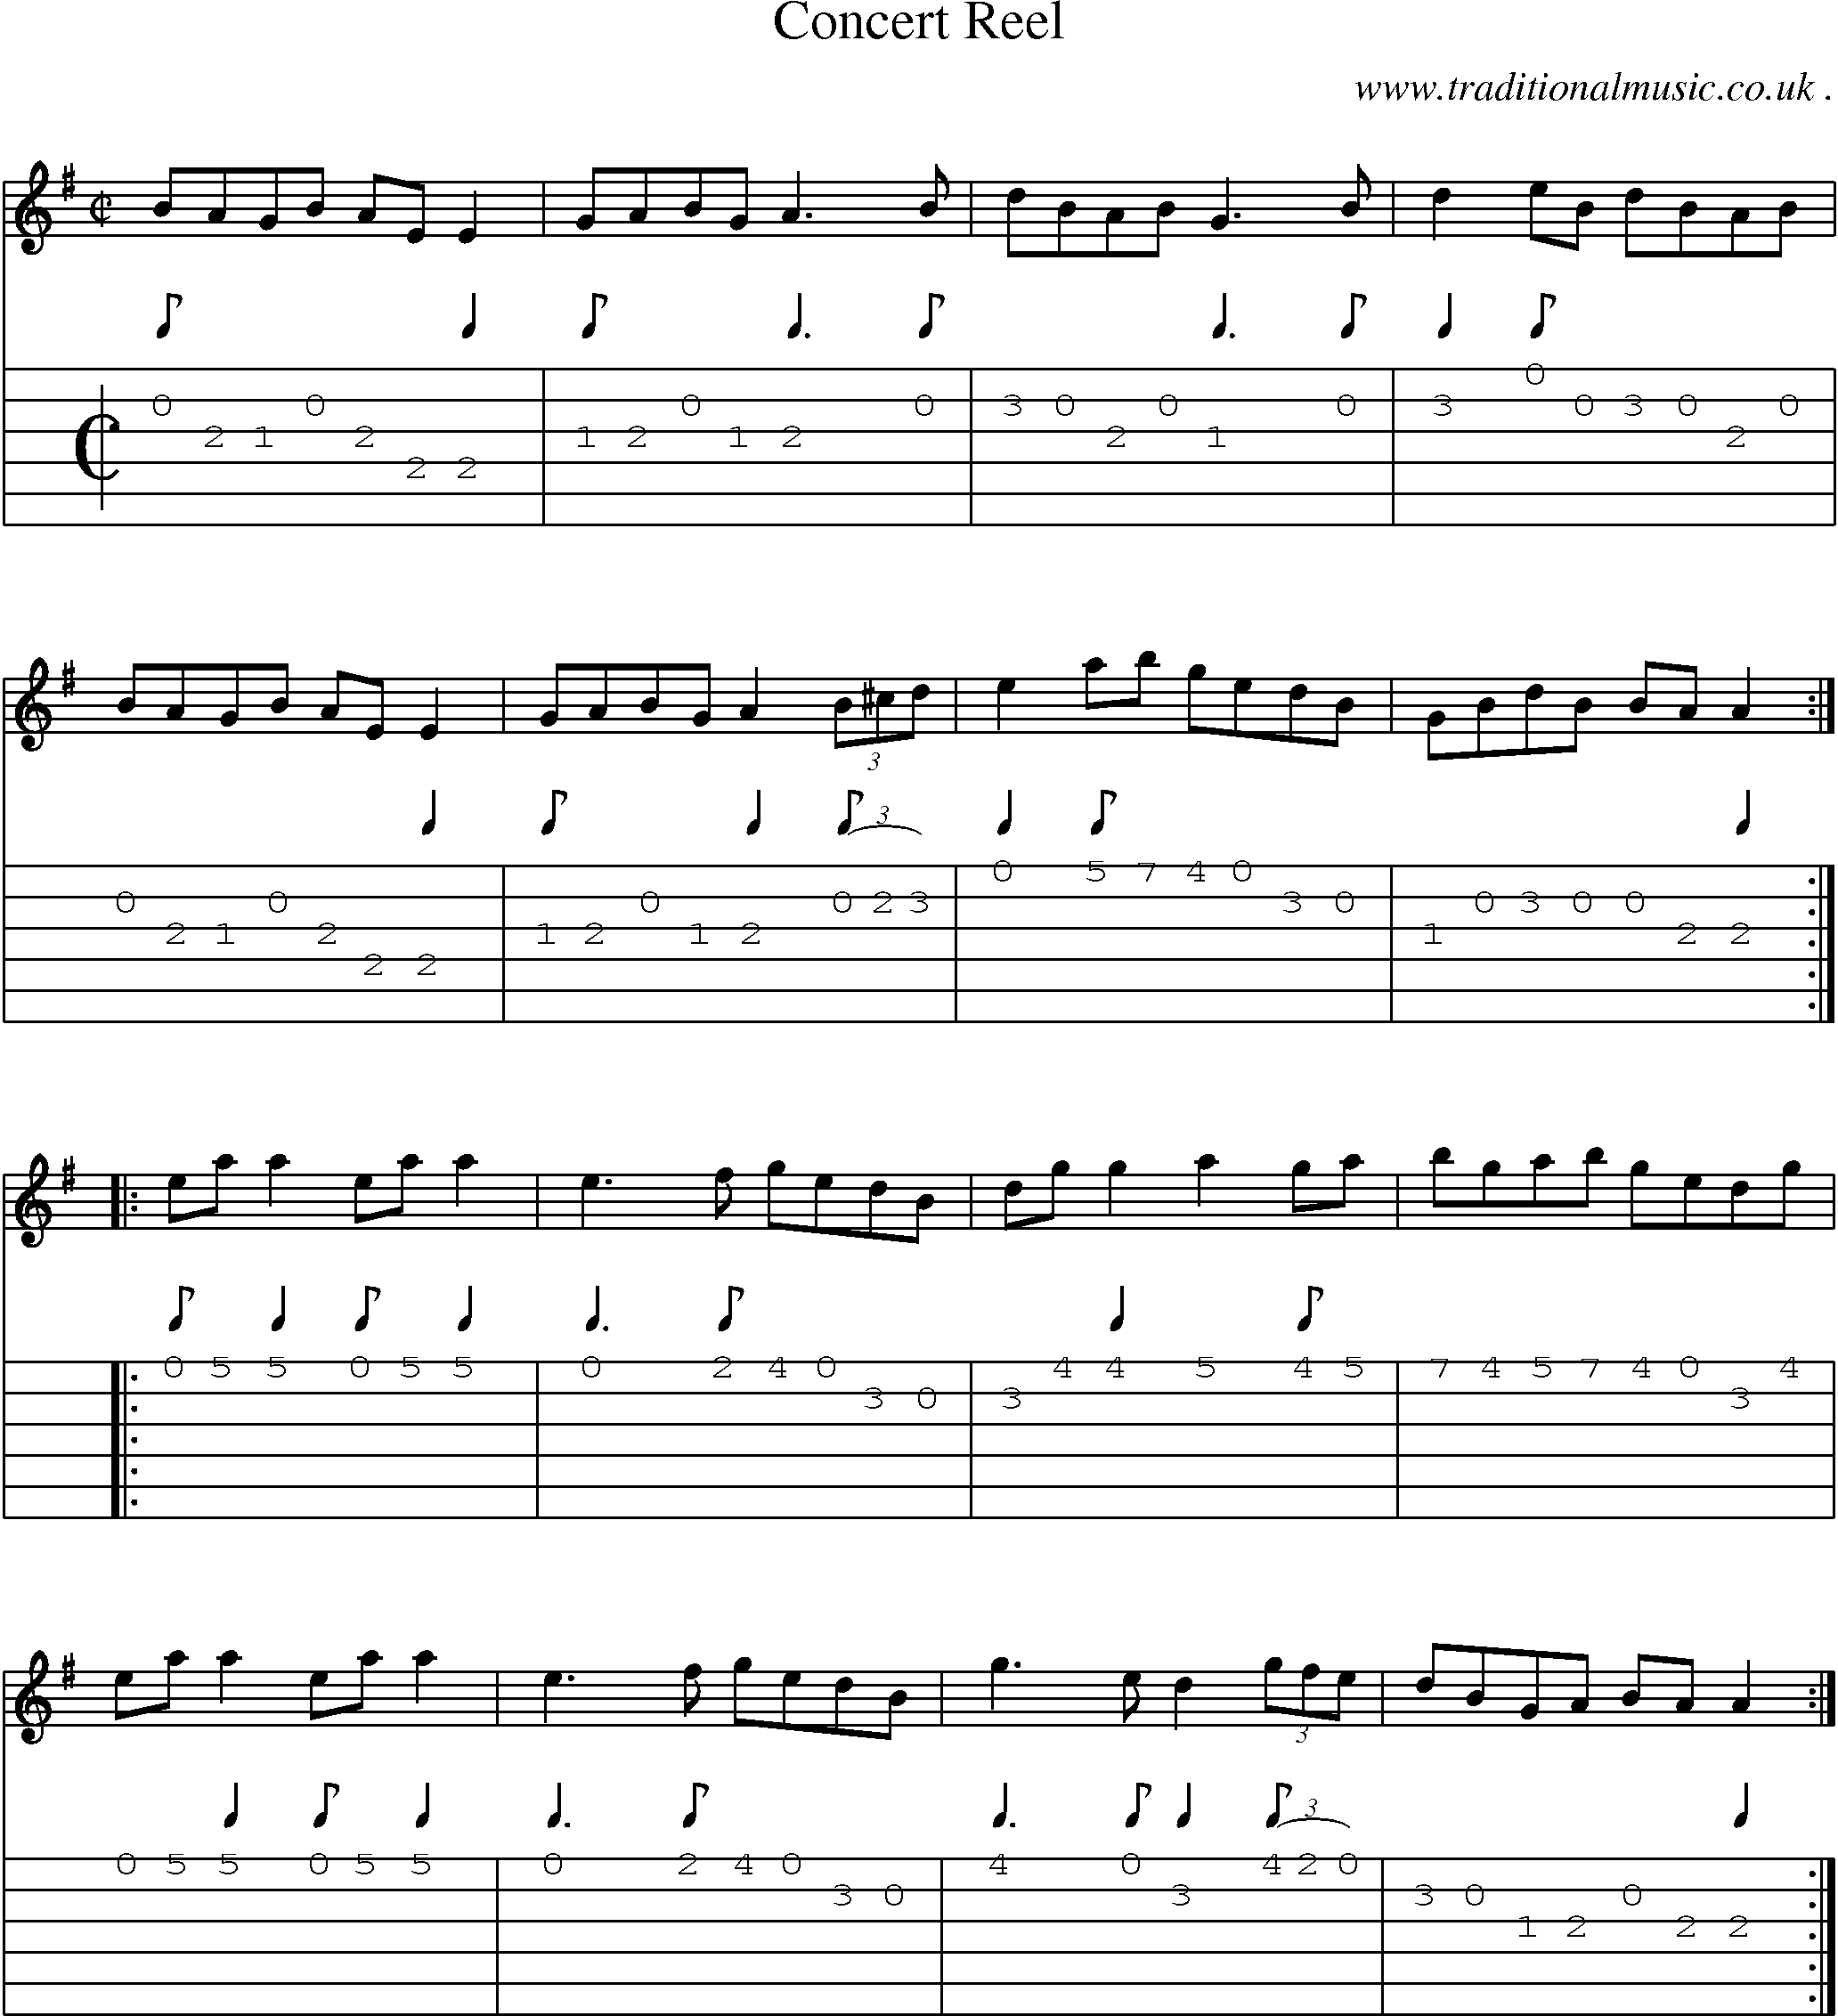 Sheet-Music and Guitar Tabs for Concert Reel